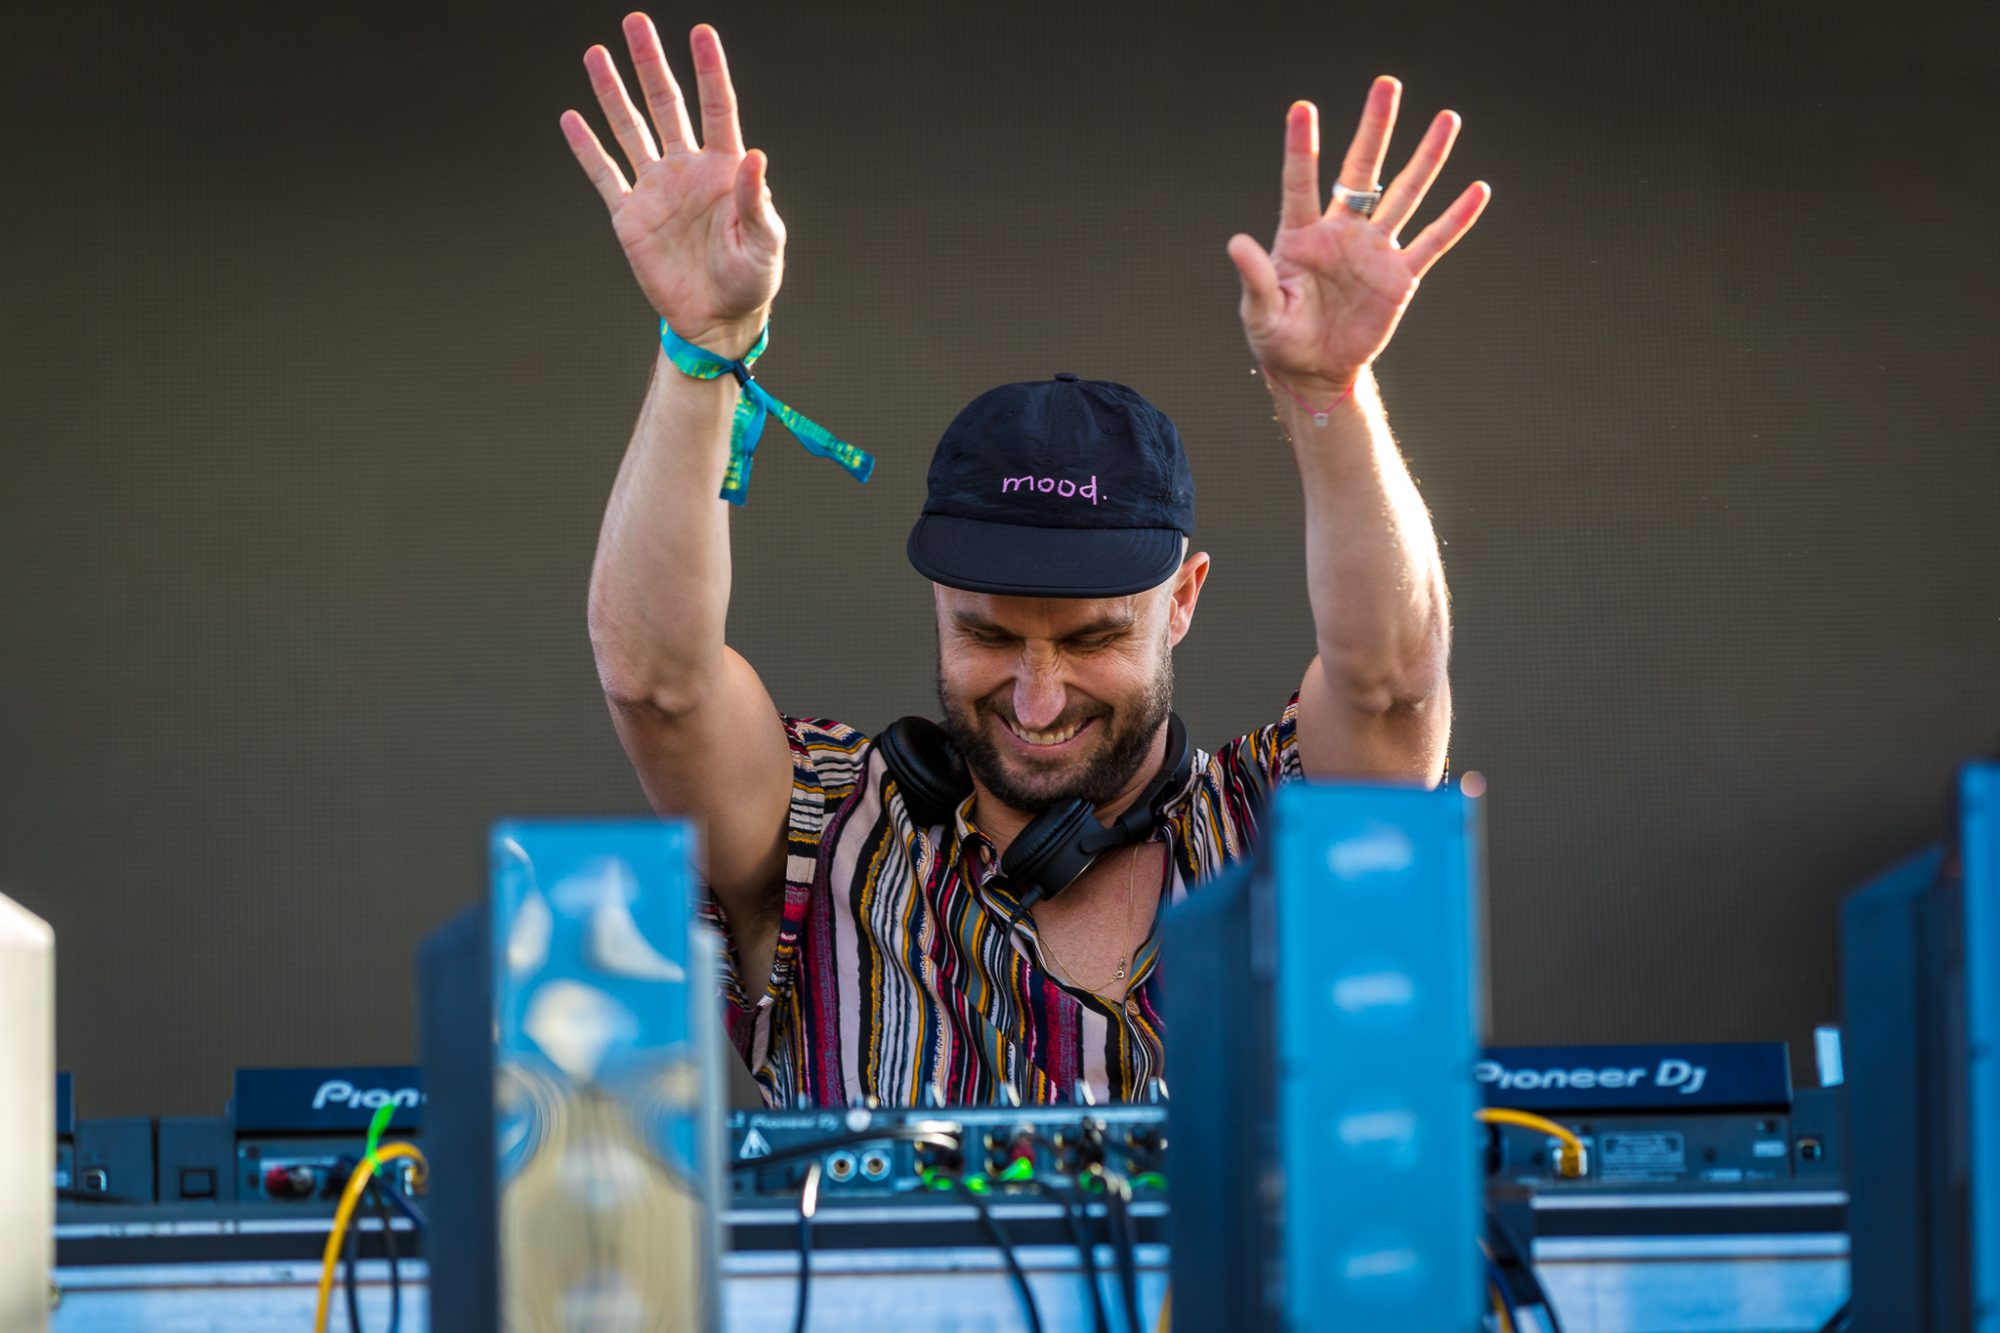 FISHER Drops Lineup for Debut Edition of TRIIP Festival Malta